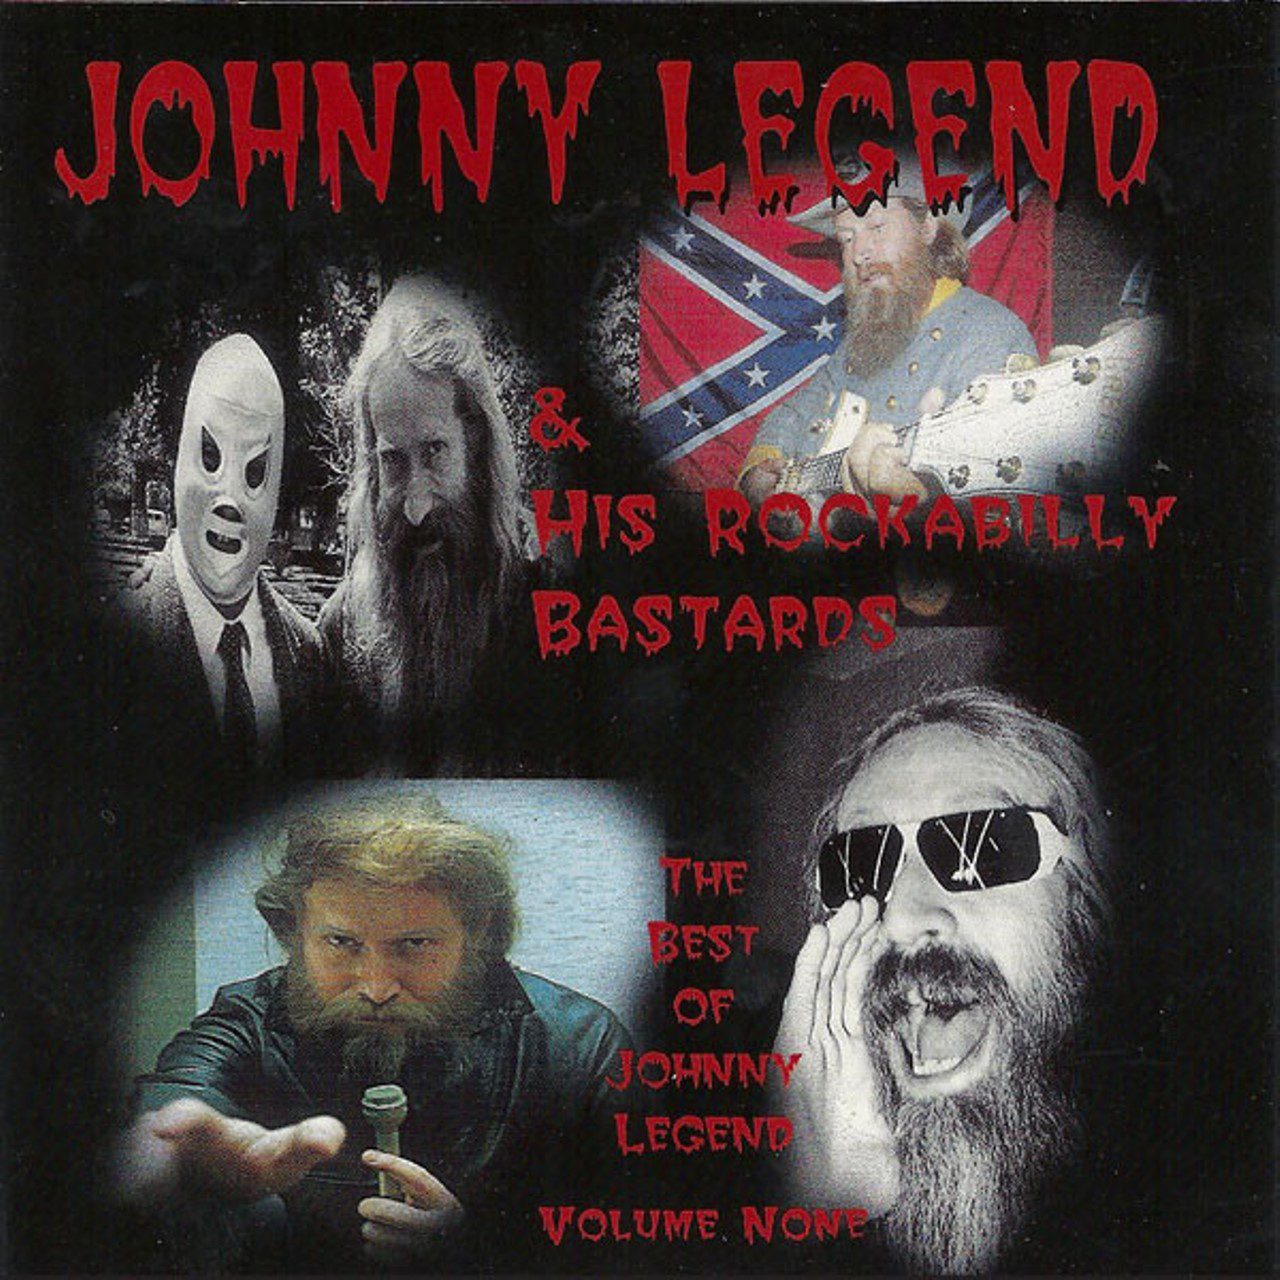 Johnny Legend - The Best Of, Vol. None cover album